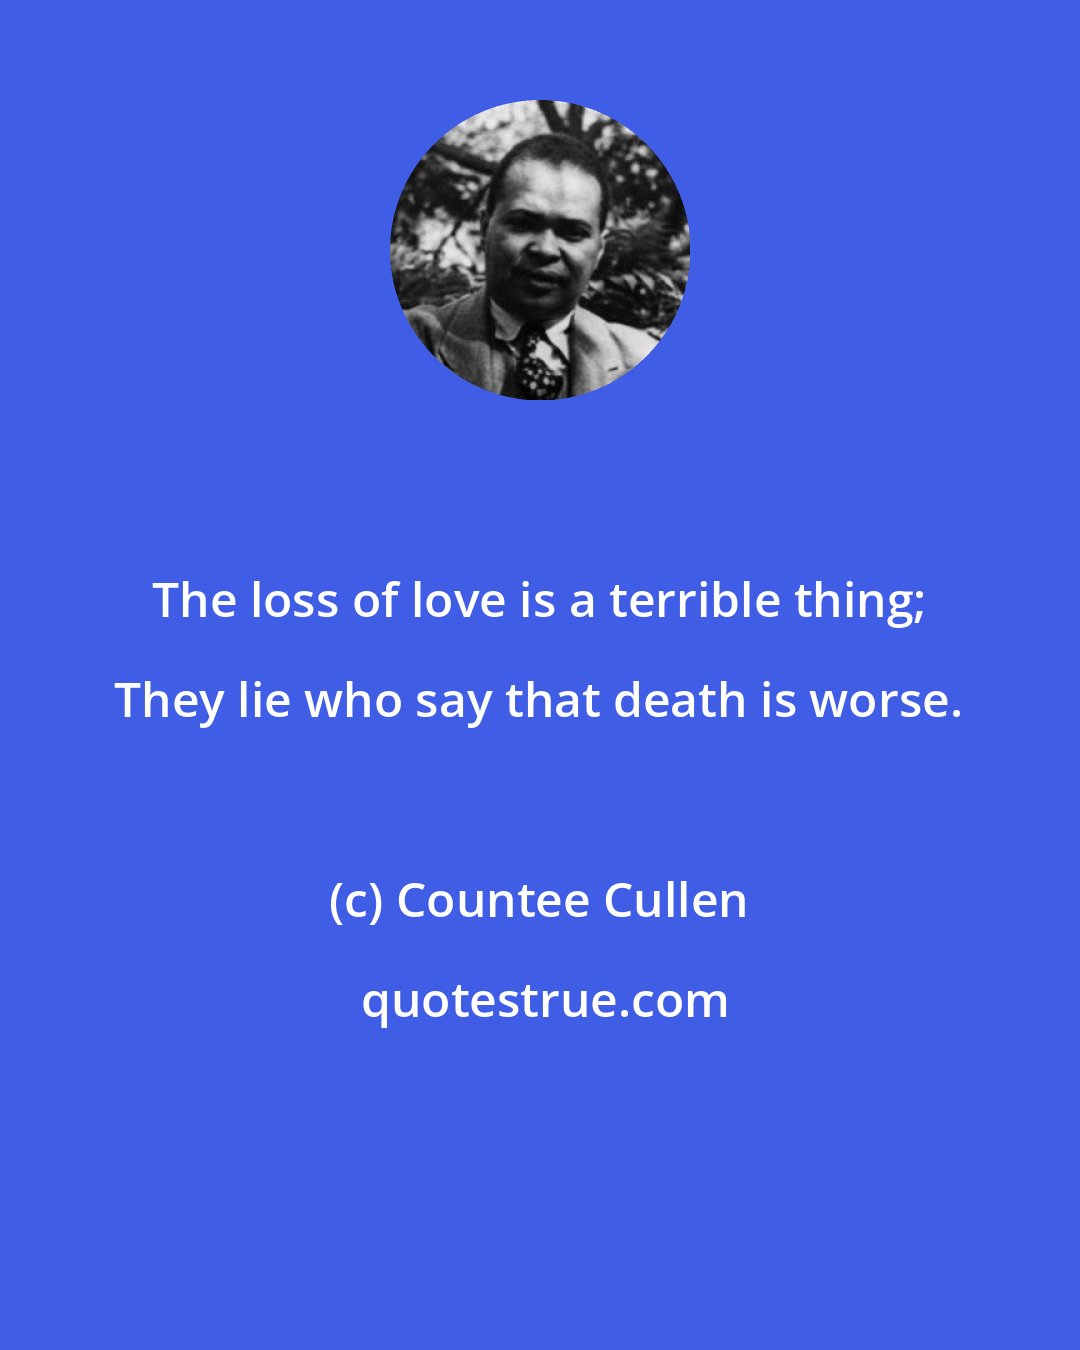 Countee Cullen: The loss of love is a terrible thing; They lie who say that death is worse.